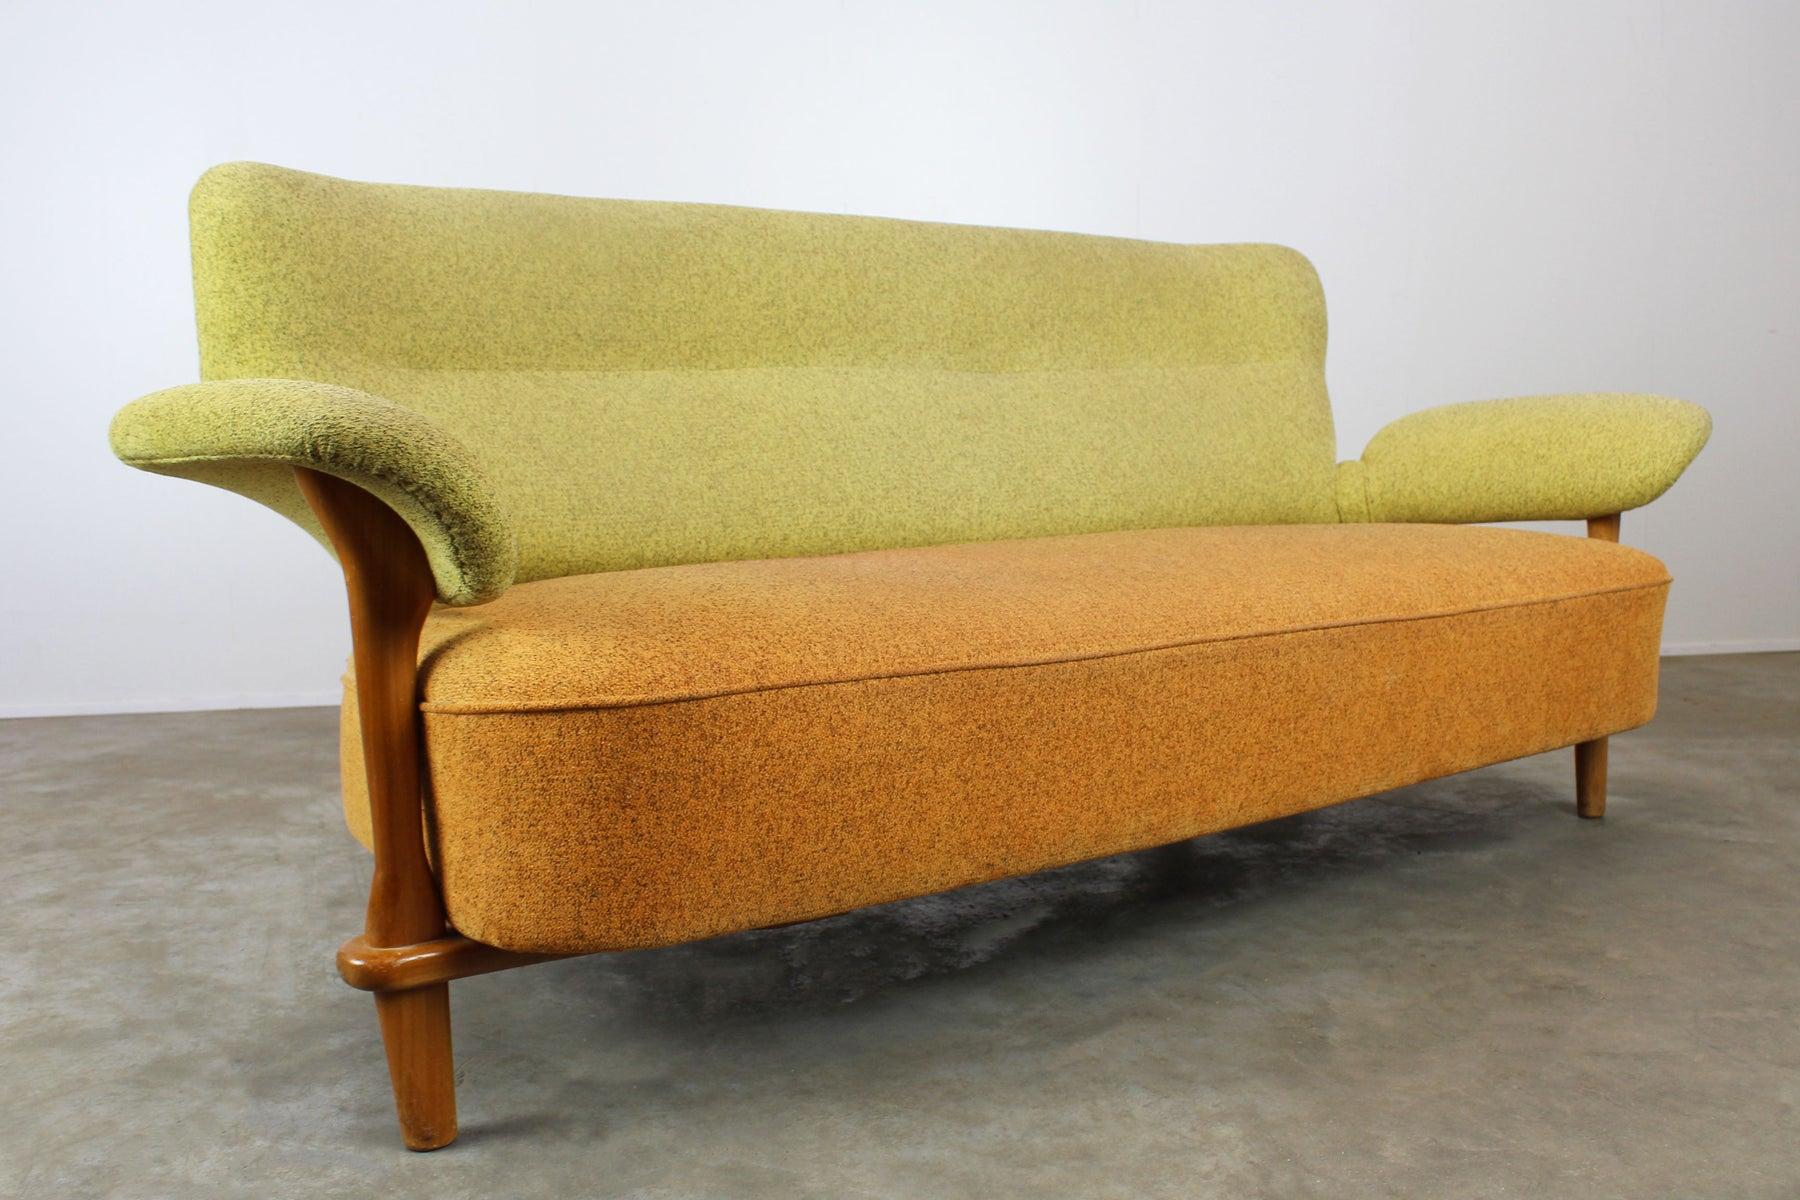 Rare Dutch Design sofa by Theo Ruth F109 for Artifort 1950 Mid-Century Modern For Sale 1